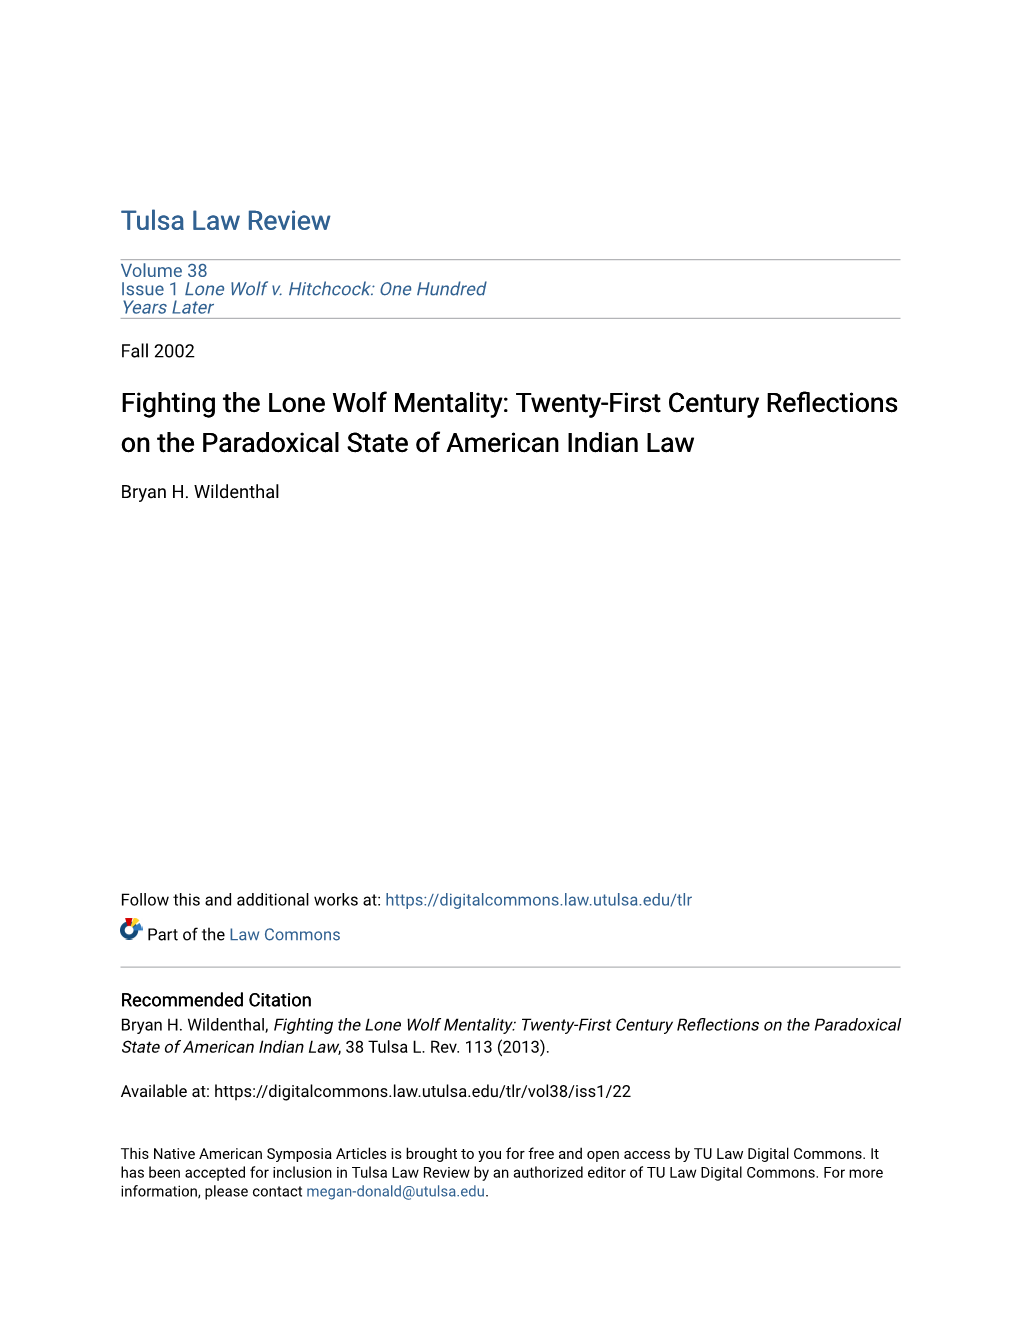 Fighting the Lone Wolf Mentality: Twenty-First Century Reflections on the Paradoxical State of American Indian Law